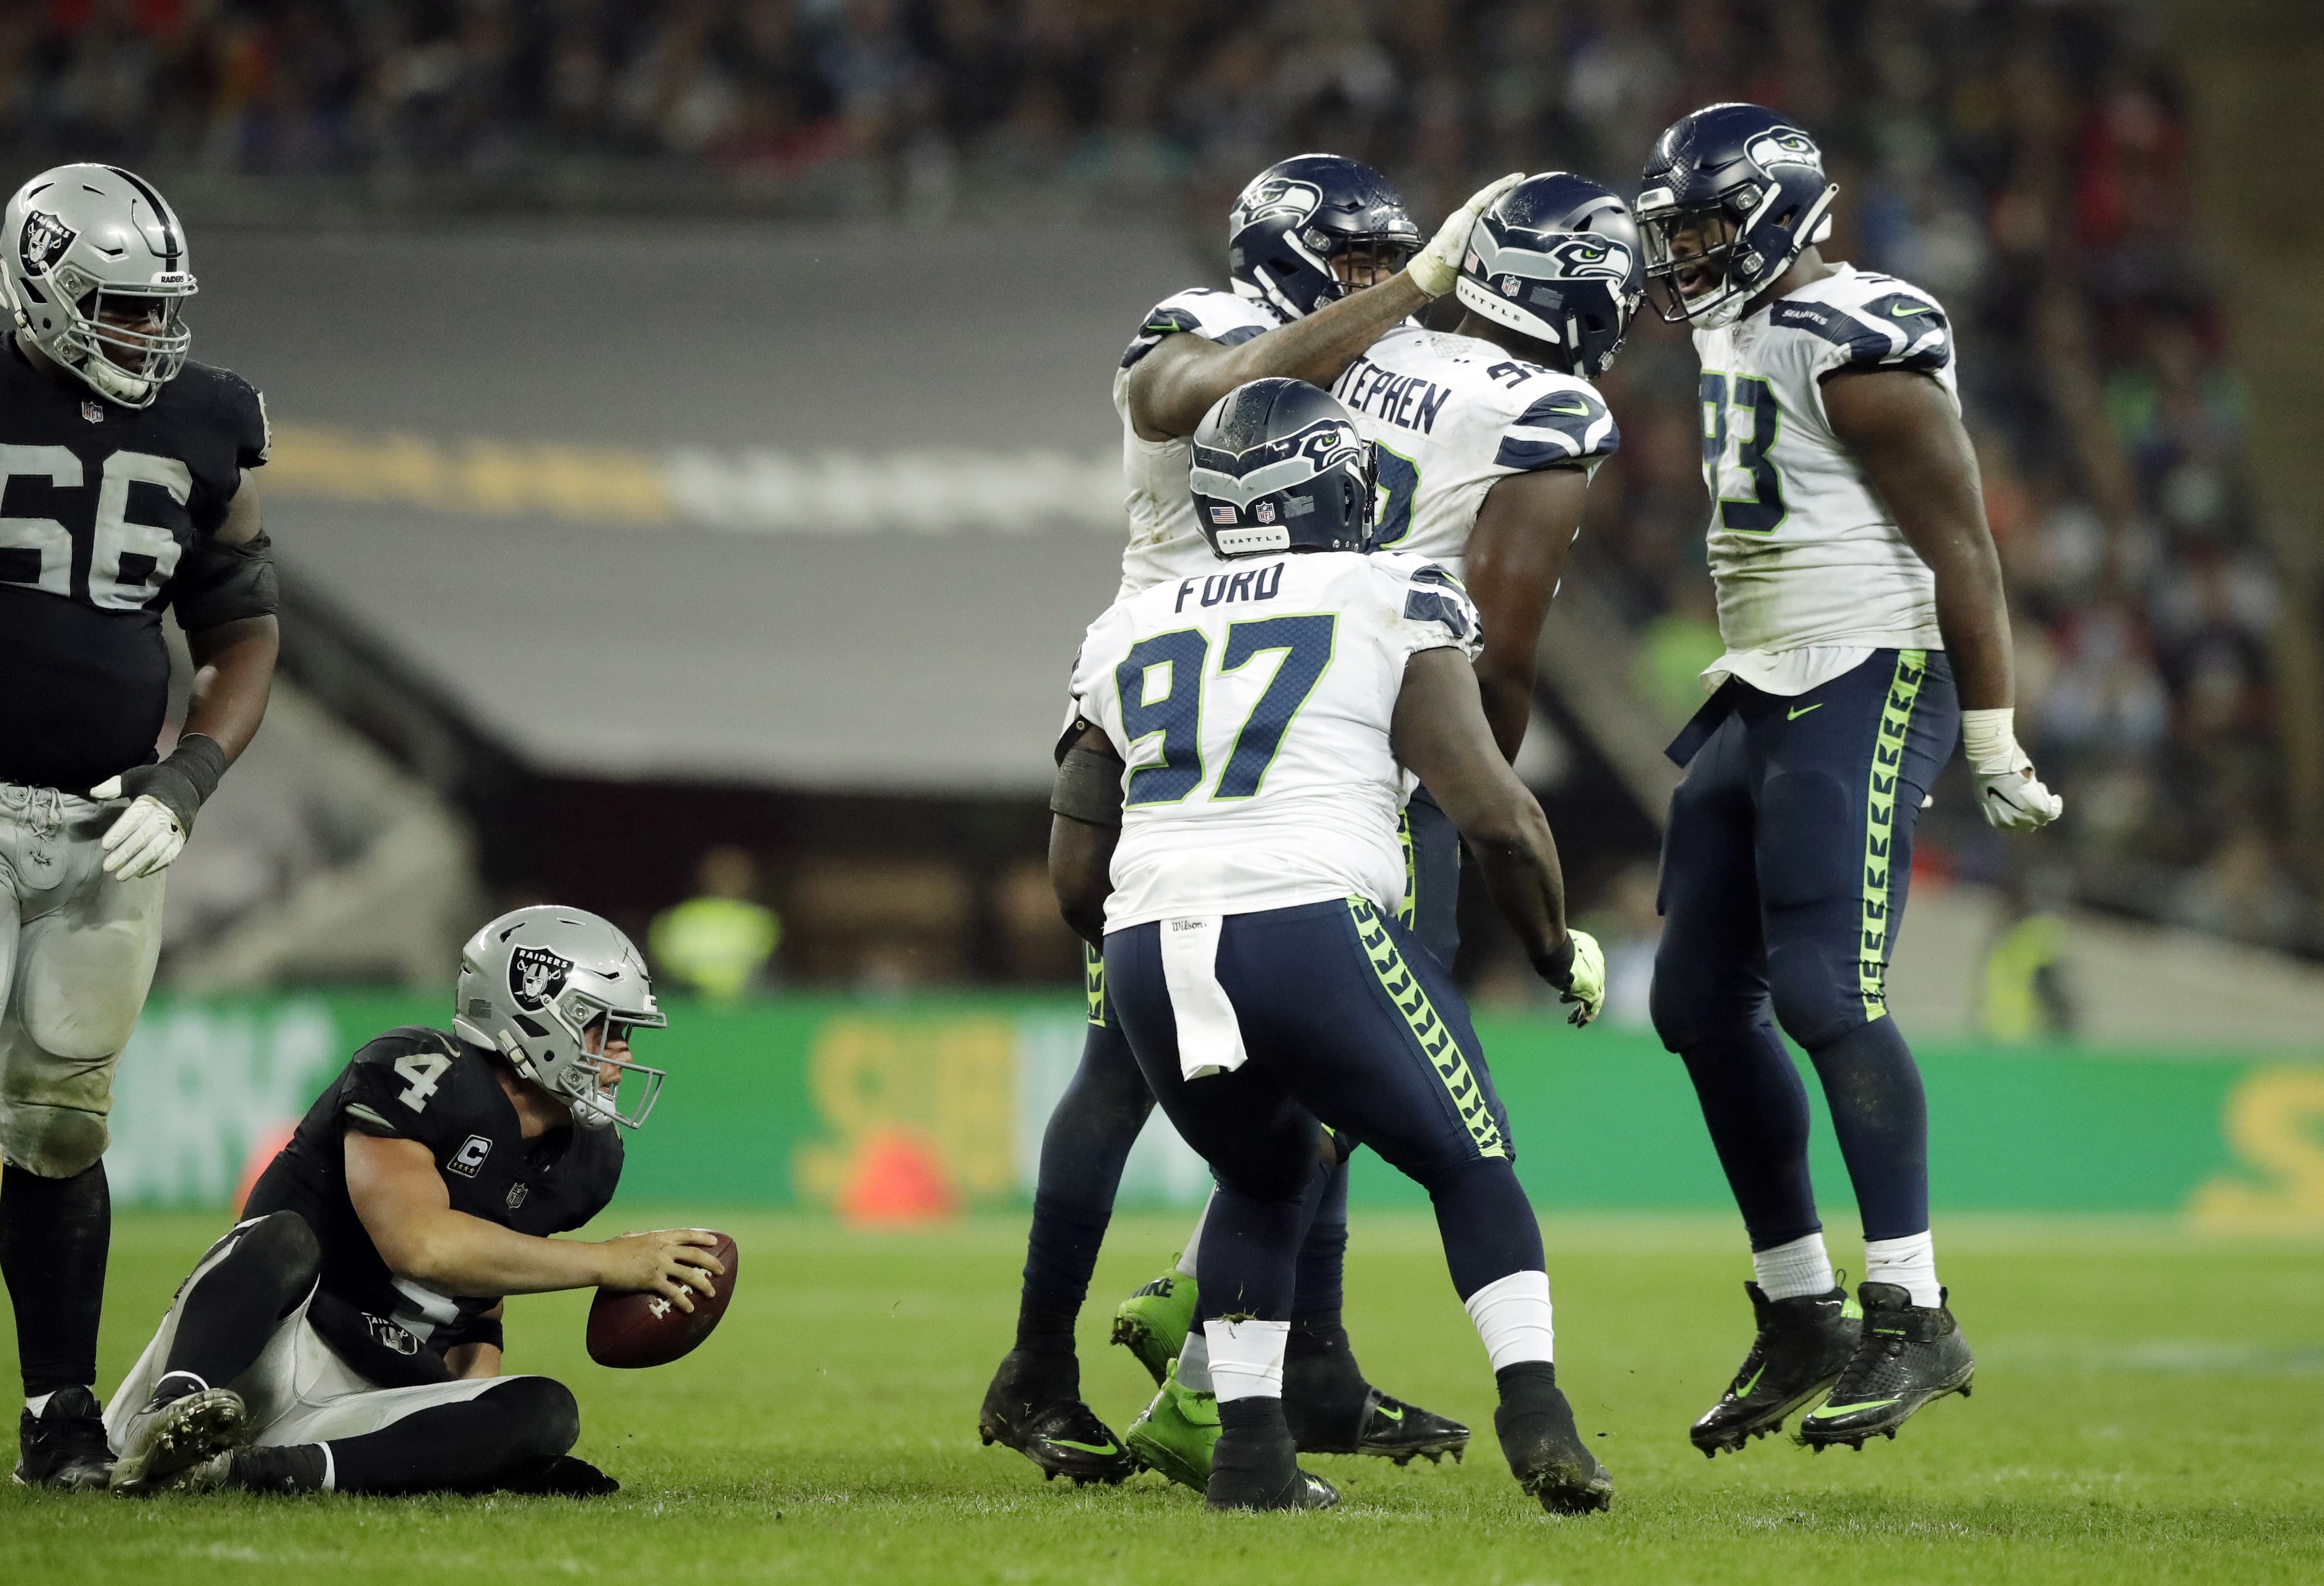 Seattle Seahawks players react after sacking Oakland Raiders quarterback Derek Carr (4), bottom left, during the second half of an NFL football game at Wembley stadium in London, Sunday, Oct. 14, 2018.